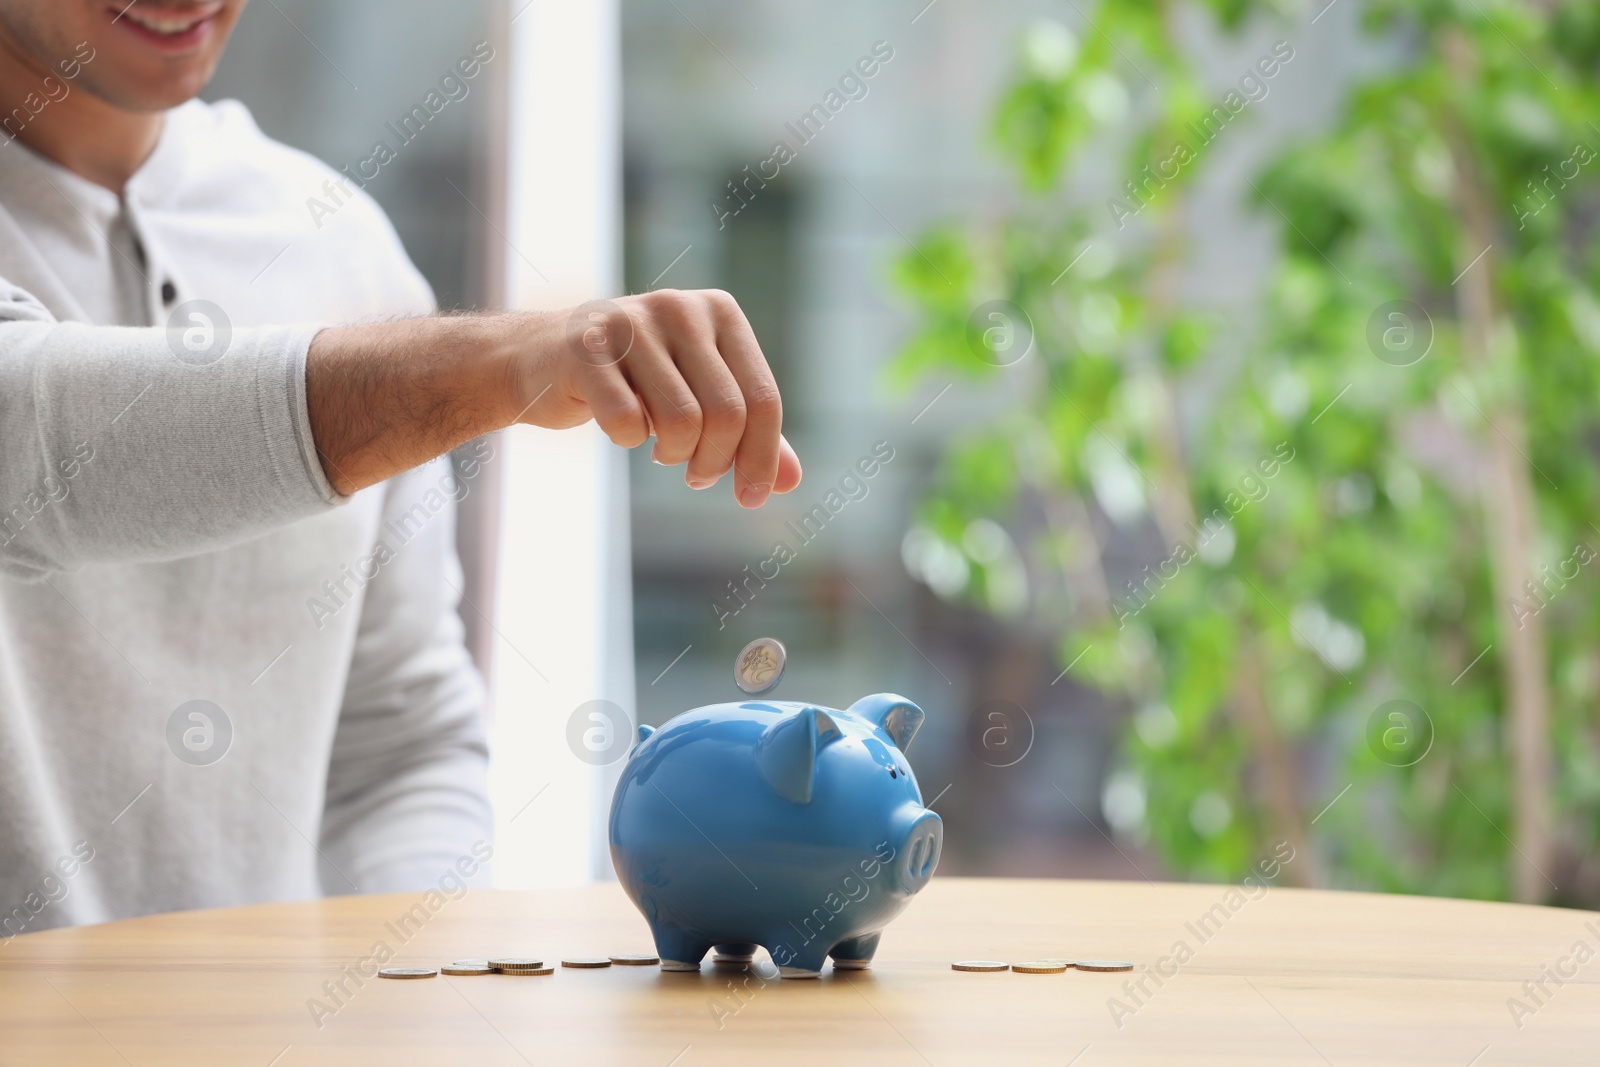 Photo of Man putting money into piggy bank at table, closeup. Space for text